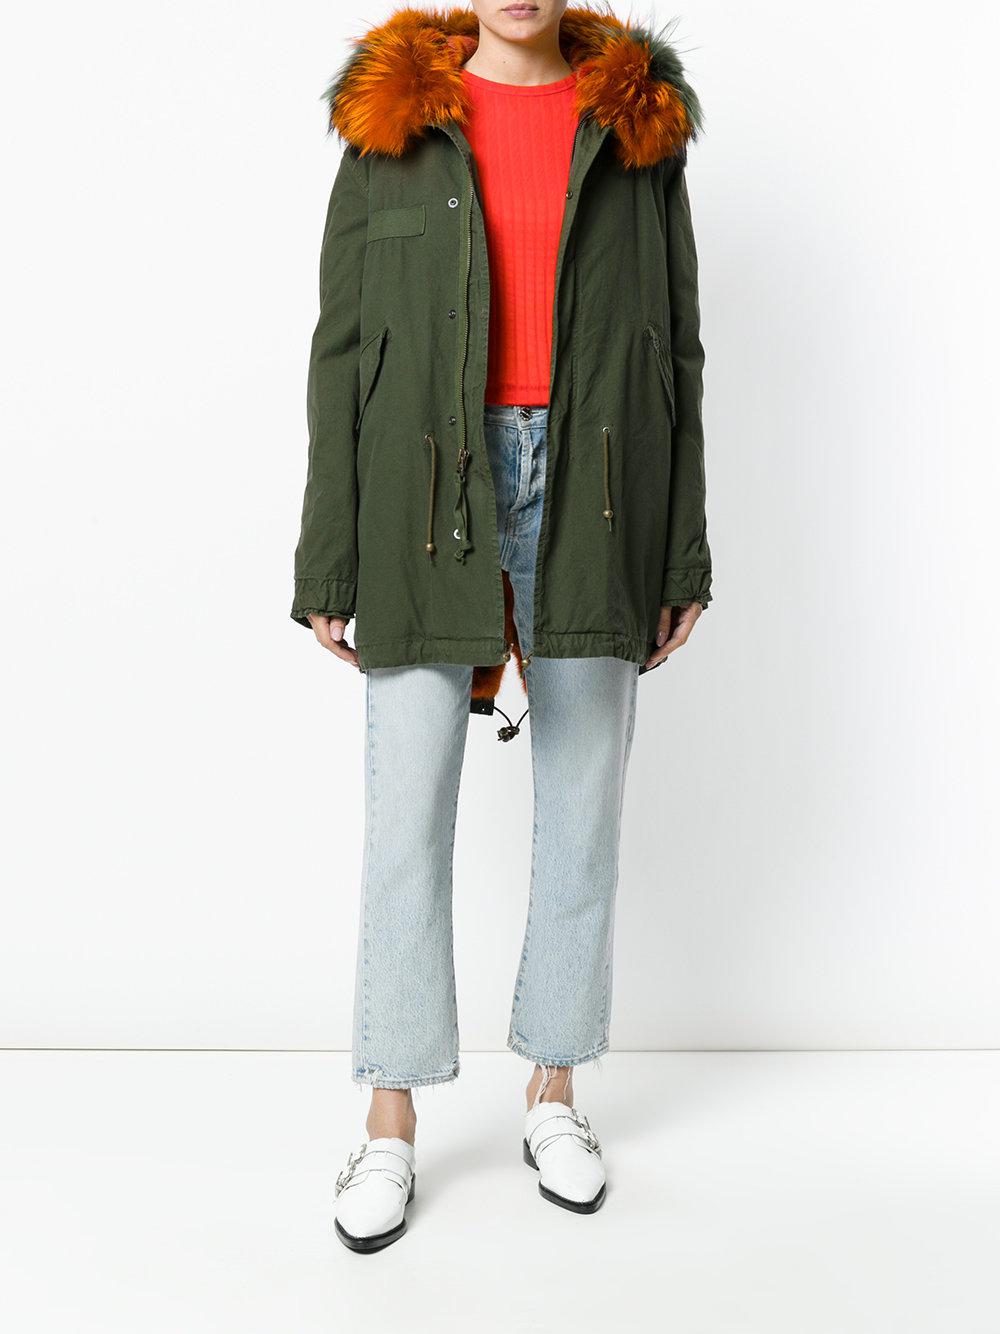 Lyst - Mr & Mrs Italy Fur Trimmed Parka in Green